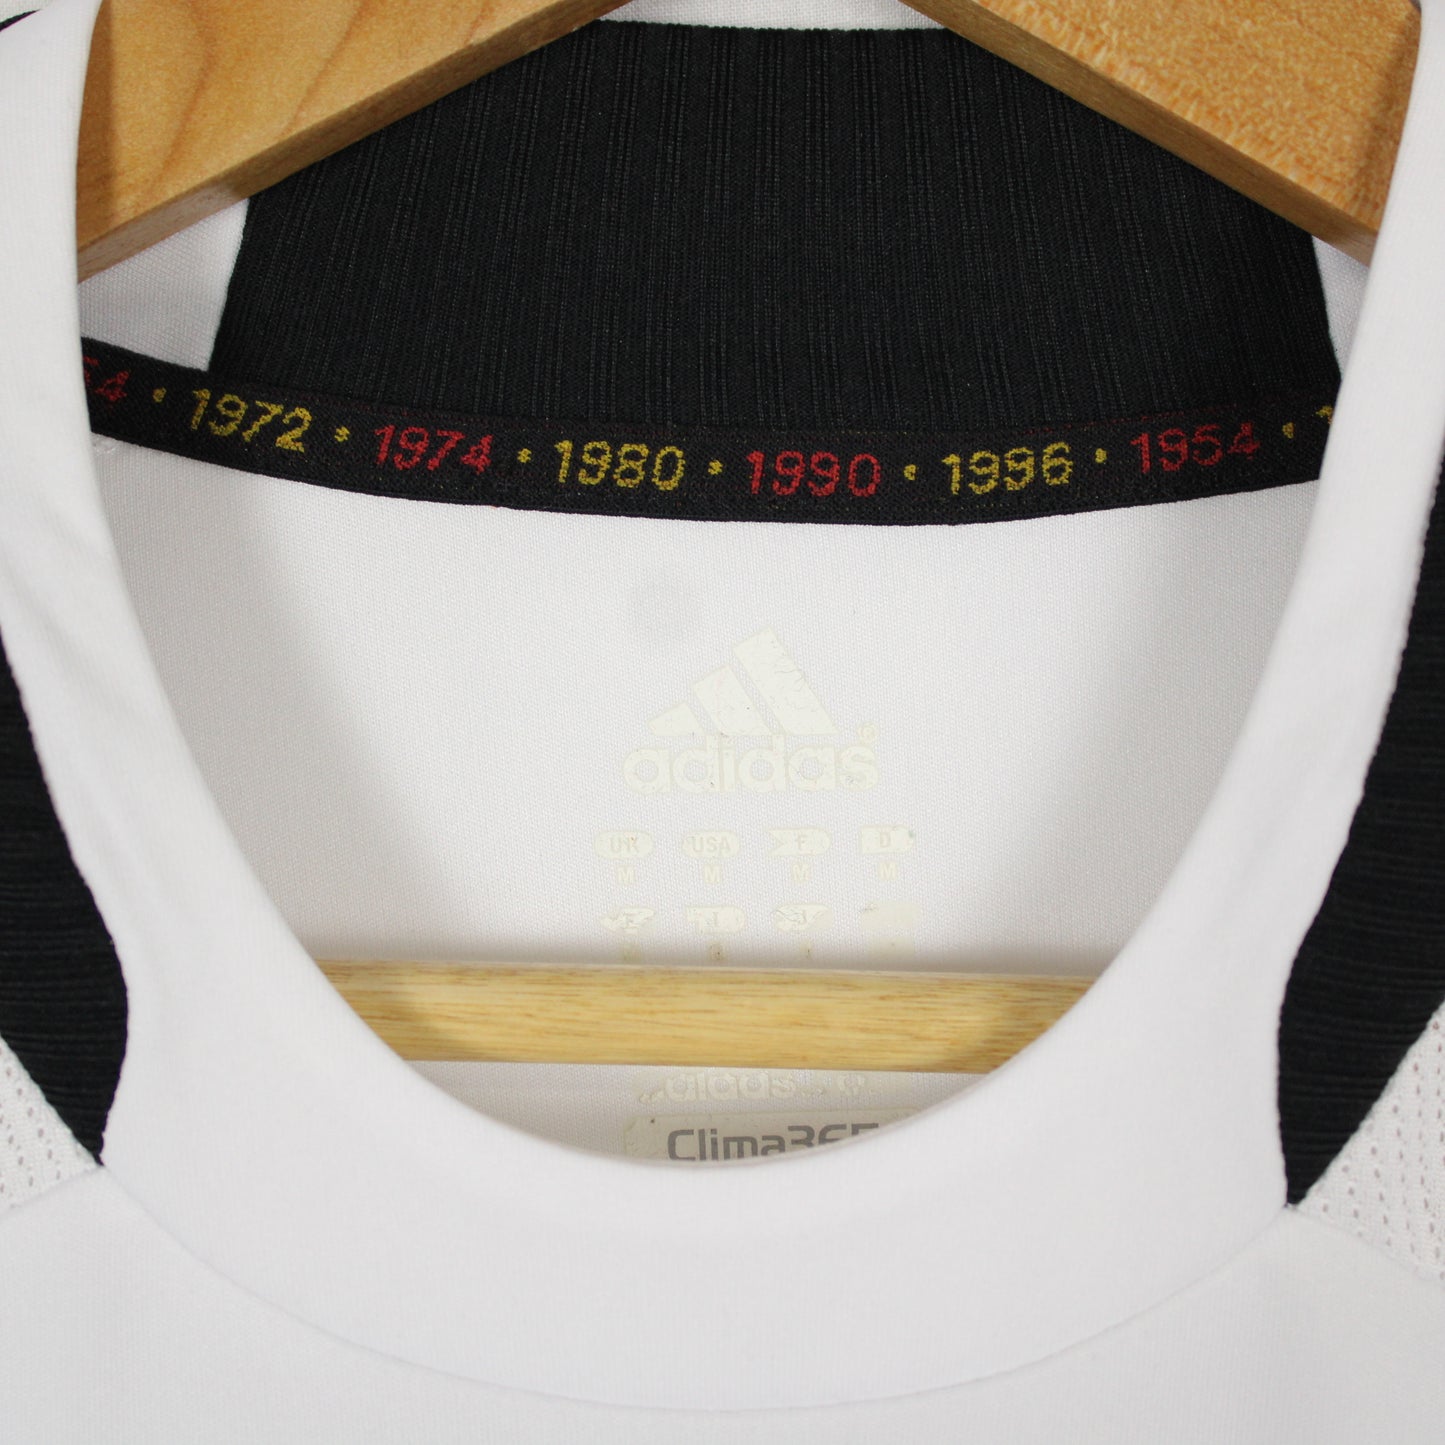 Germany 2008/09 Home Adidas Jersey - M